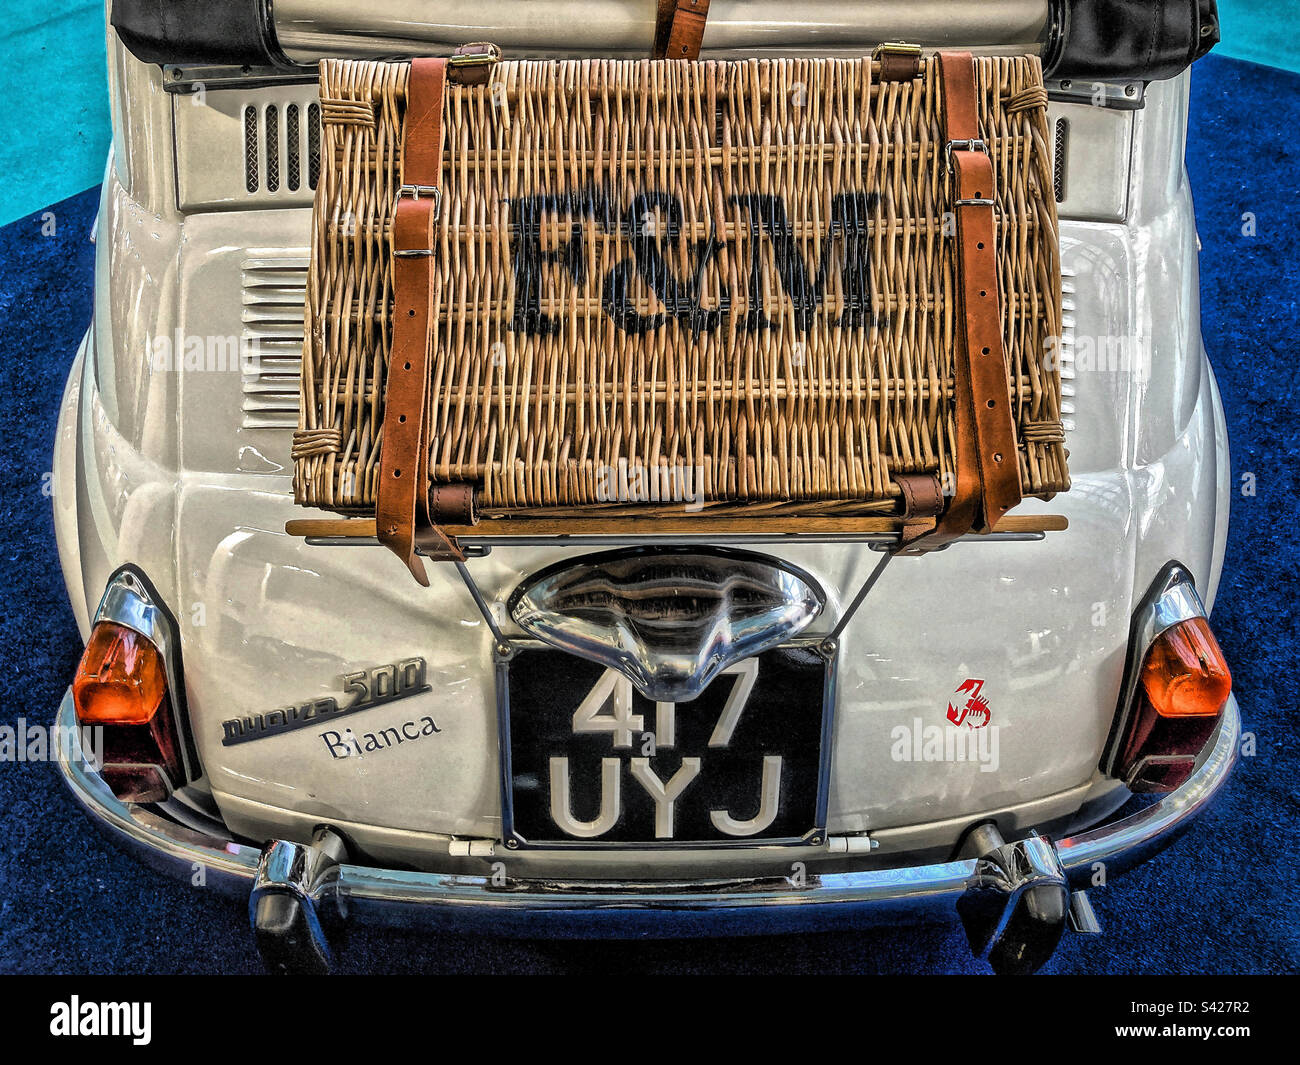 CLASSIC FIAT 500 LUGGAGE HAMPER BASKET WITH STRAPS CLASSIC CAR